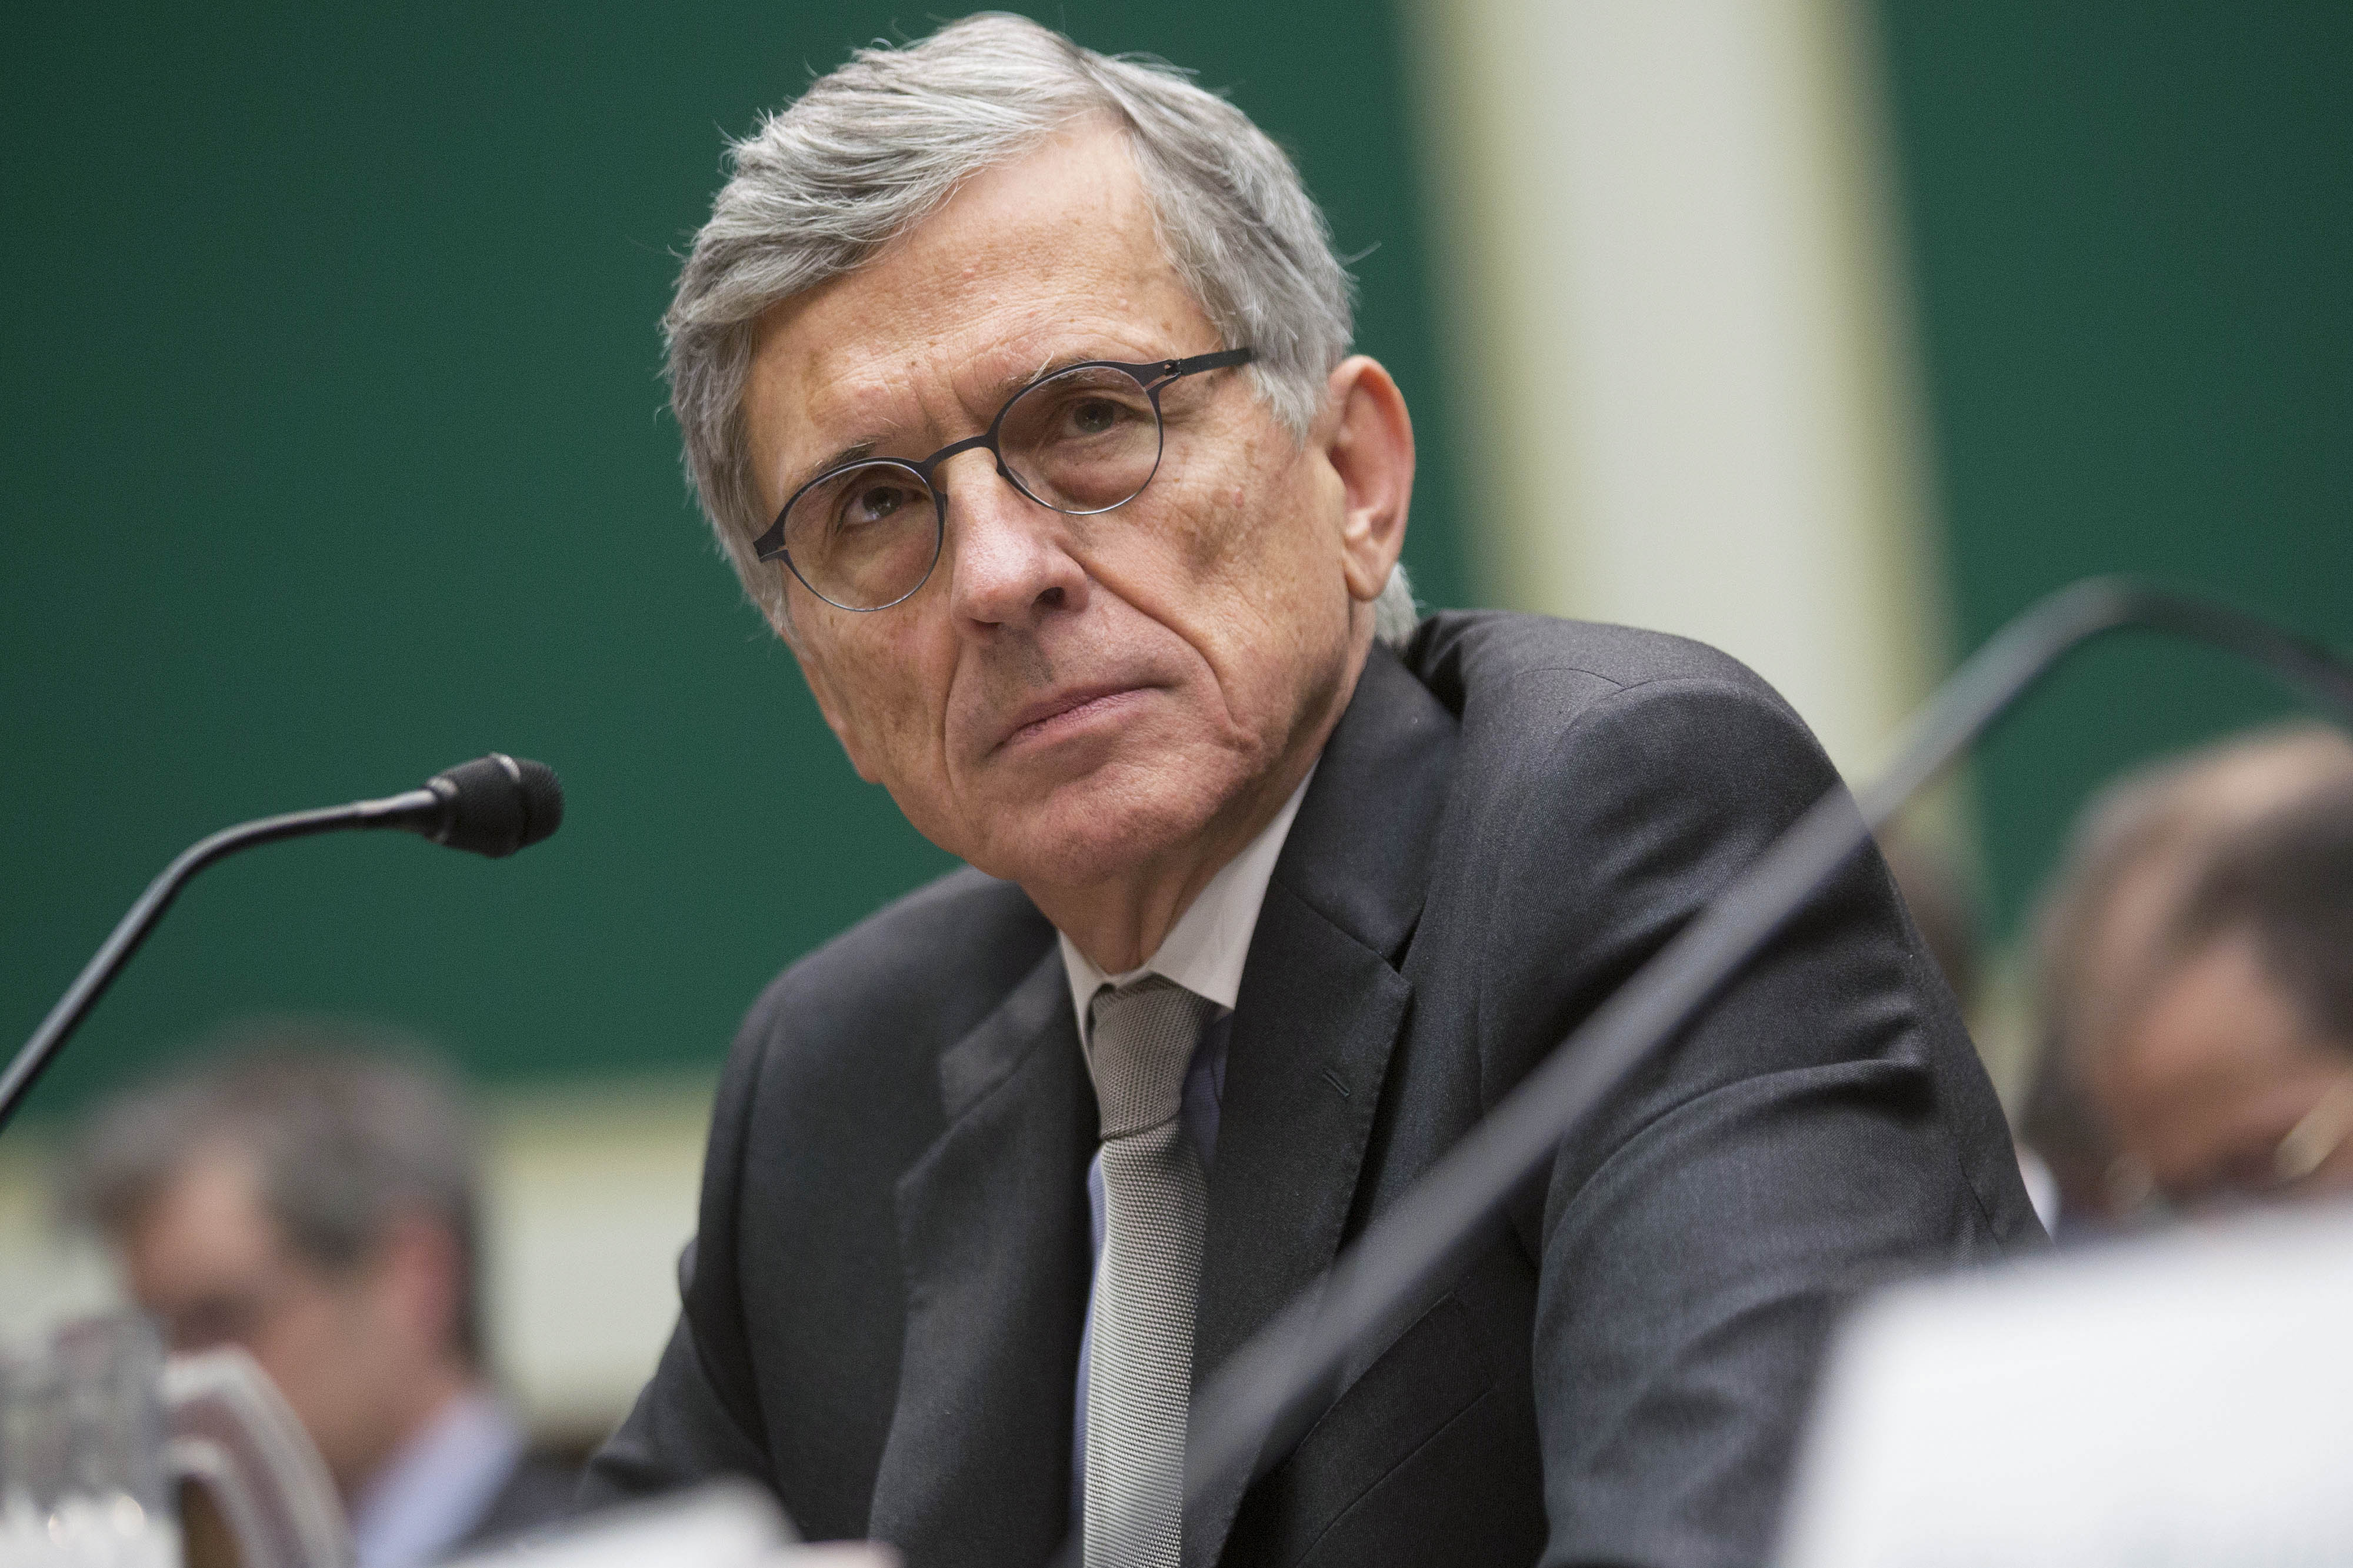 Tom Wheeler, chairman of the FCC, listens during a House Energy and Commerce Committee hearing in Washington on Dec. 12, 2013 (Andrew Harrer—Bloomberg/Getty Images)